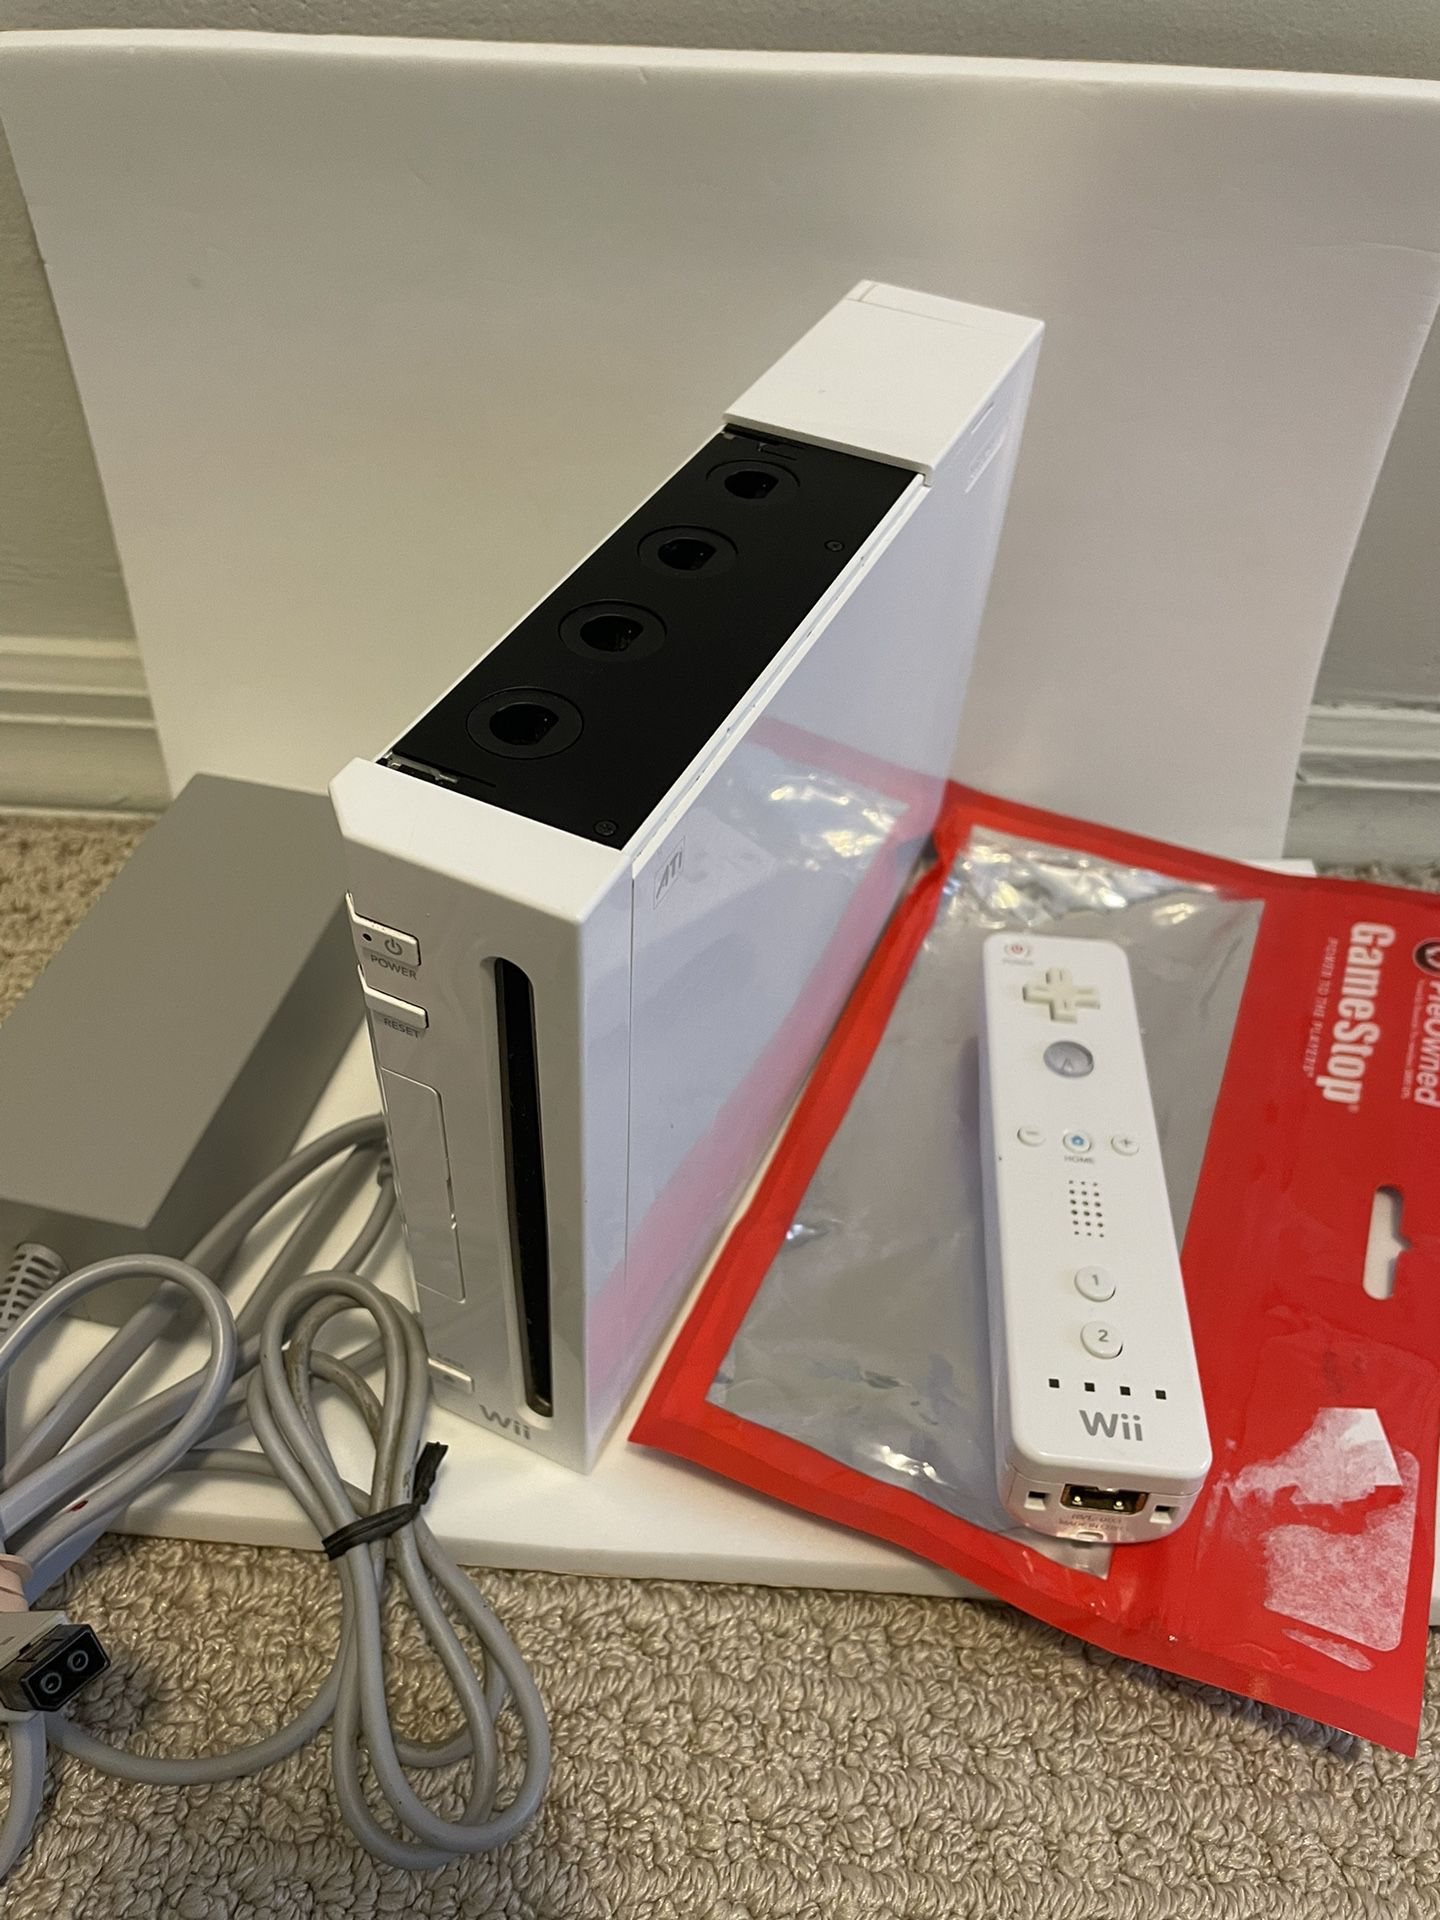 Thanksgiving Establish alcohol Nintendo Wii Console RVL-001 GameCube Compatible With Wiimote sd Card for  Sale in Lynbrook, NY - OfferUp